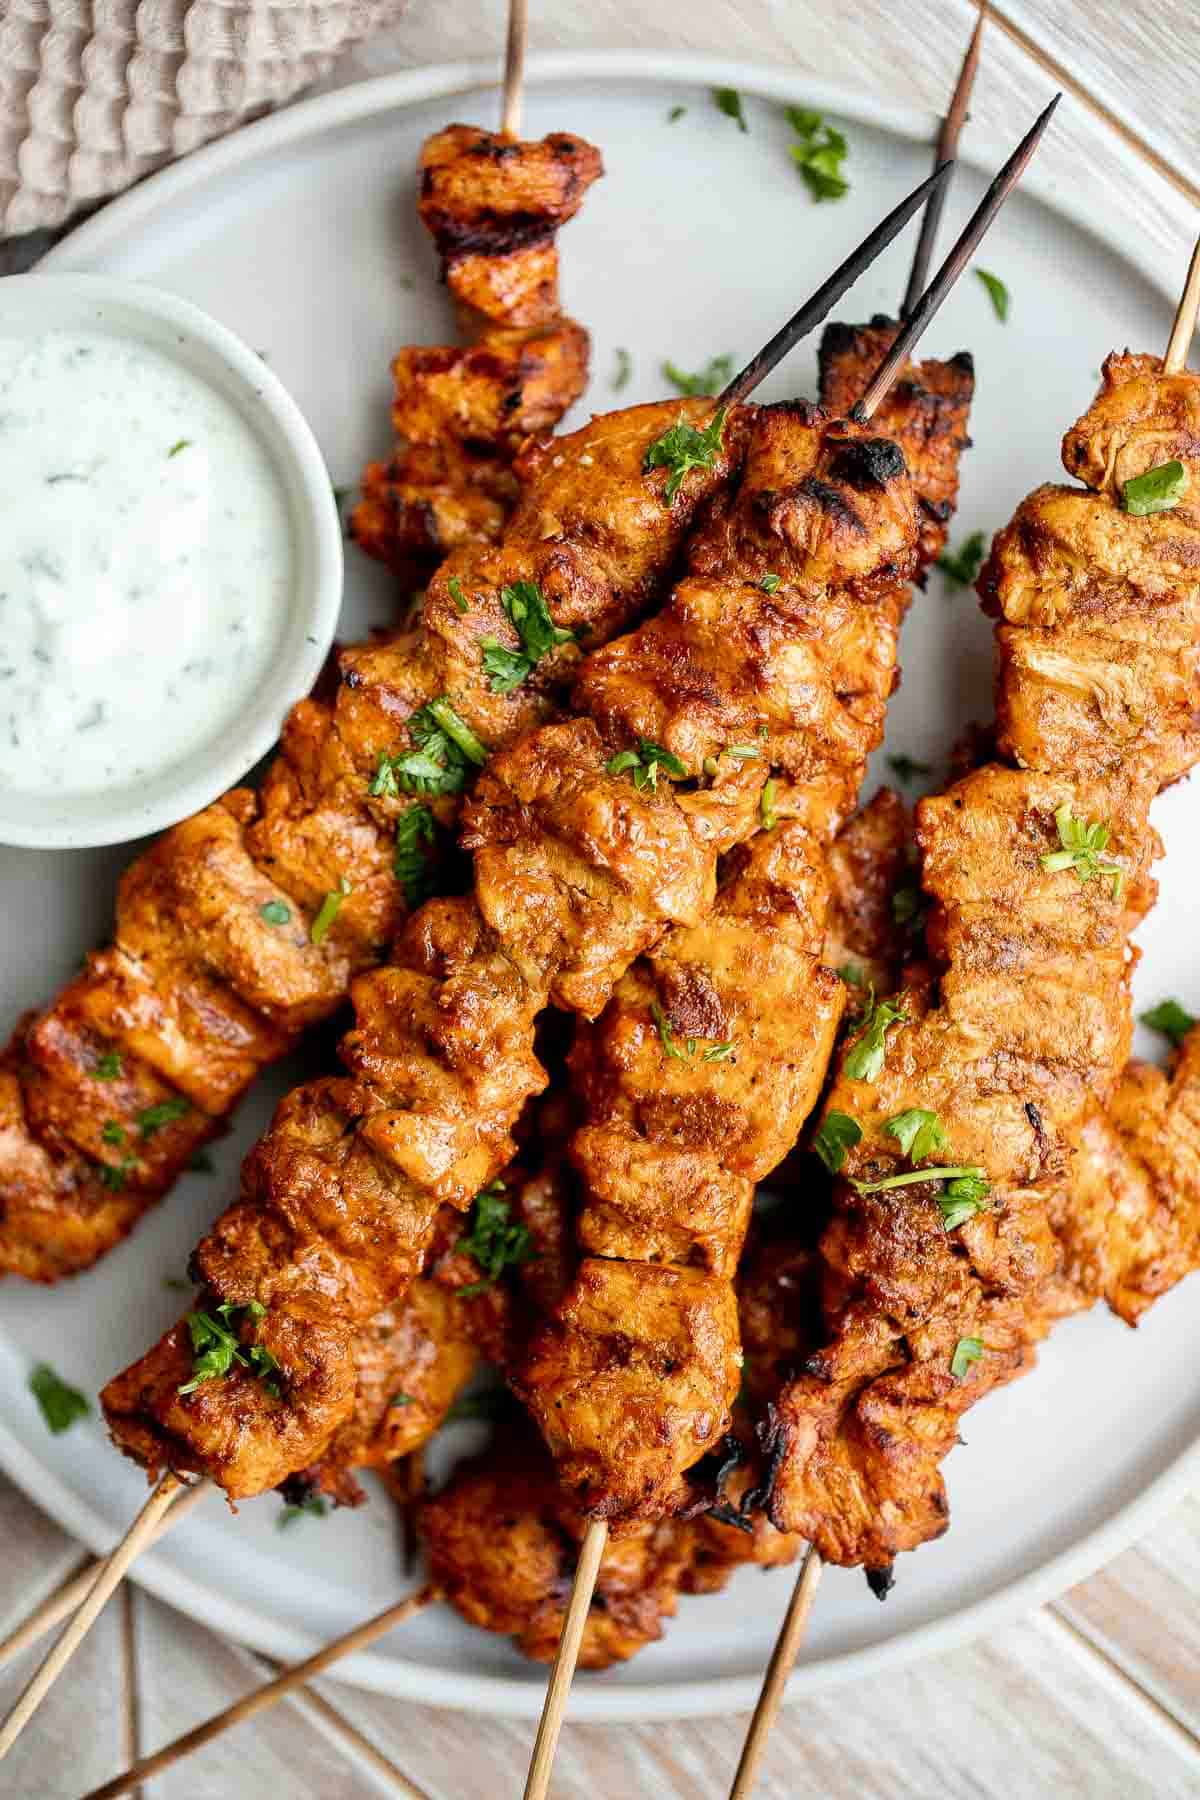 Tandoori Chicken Skewers with juicy tender chicken bites are marinated in an authentic yogurt marinade packed with a homemade Indian seasoning blend. | aheadofthyme.com